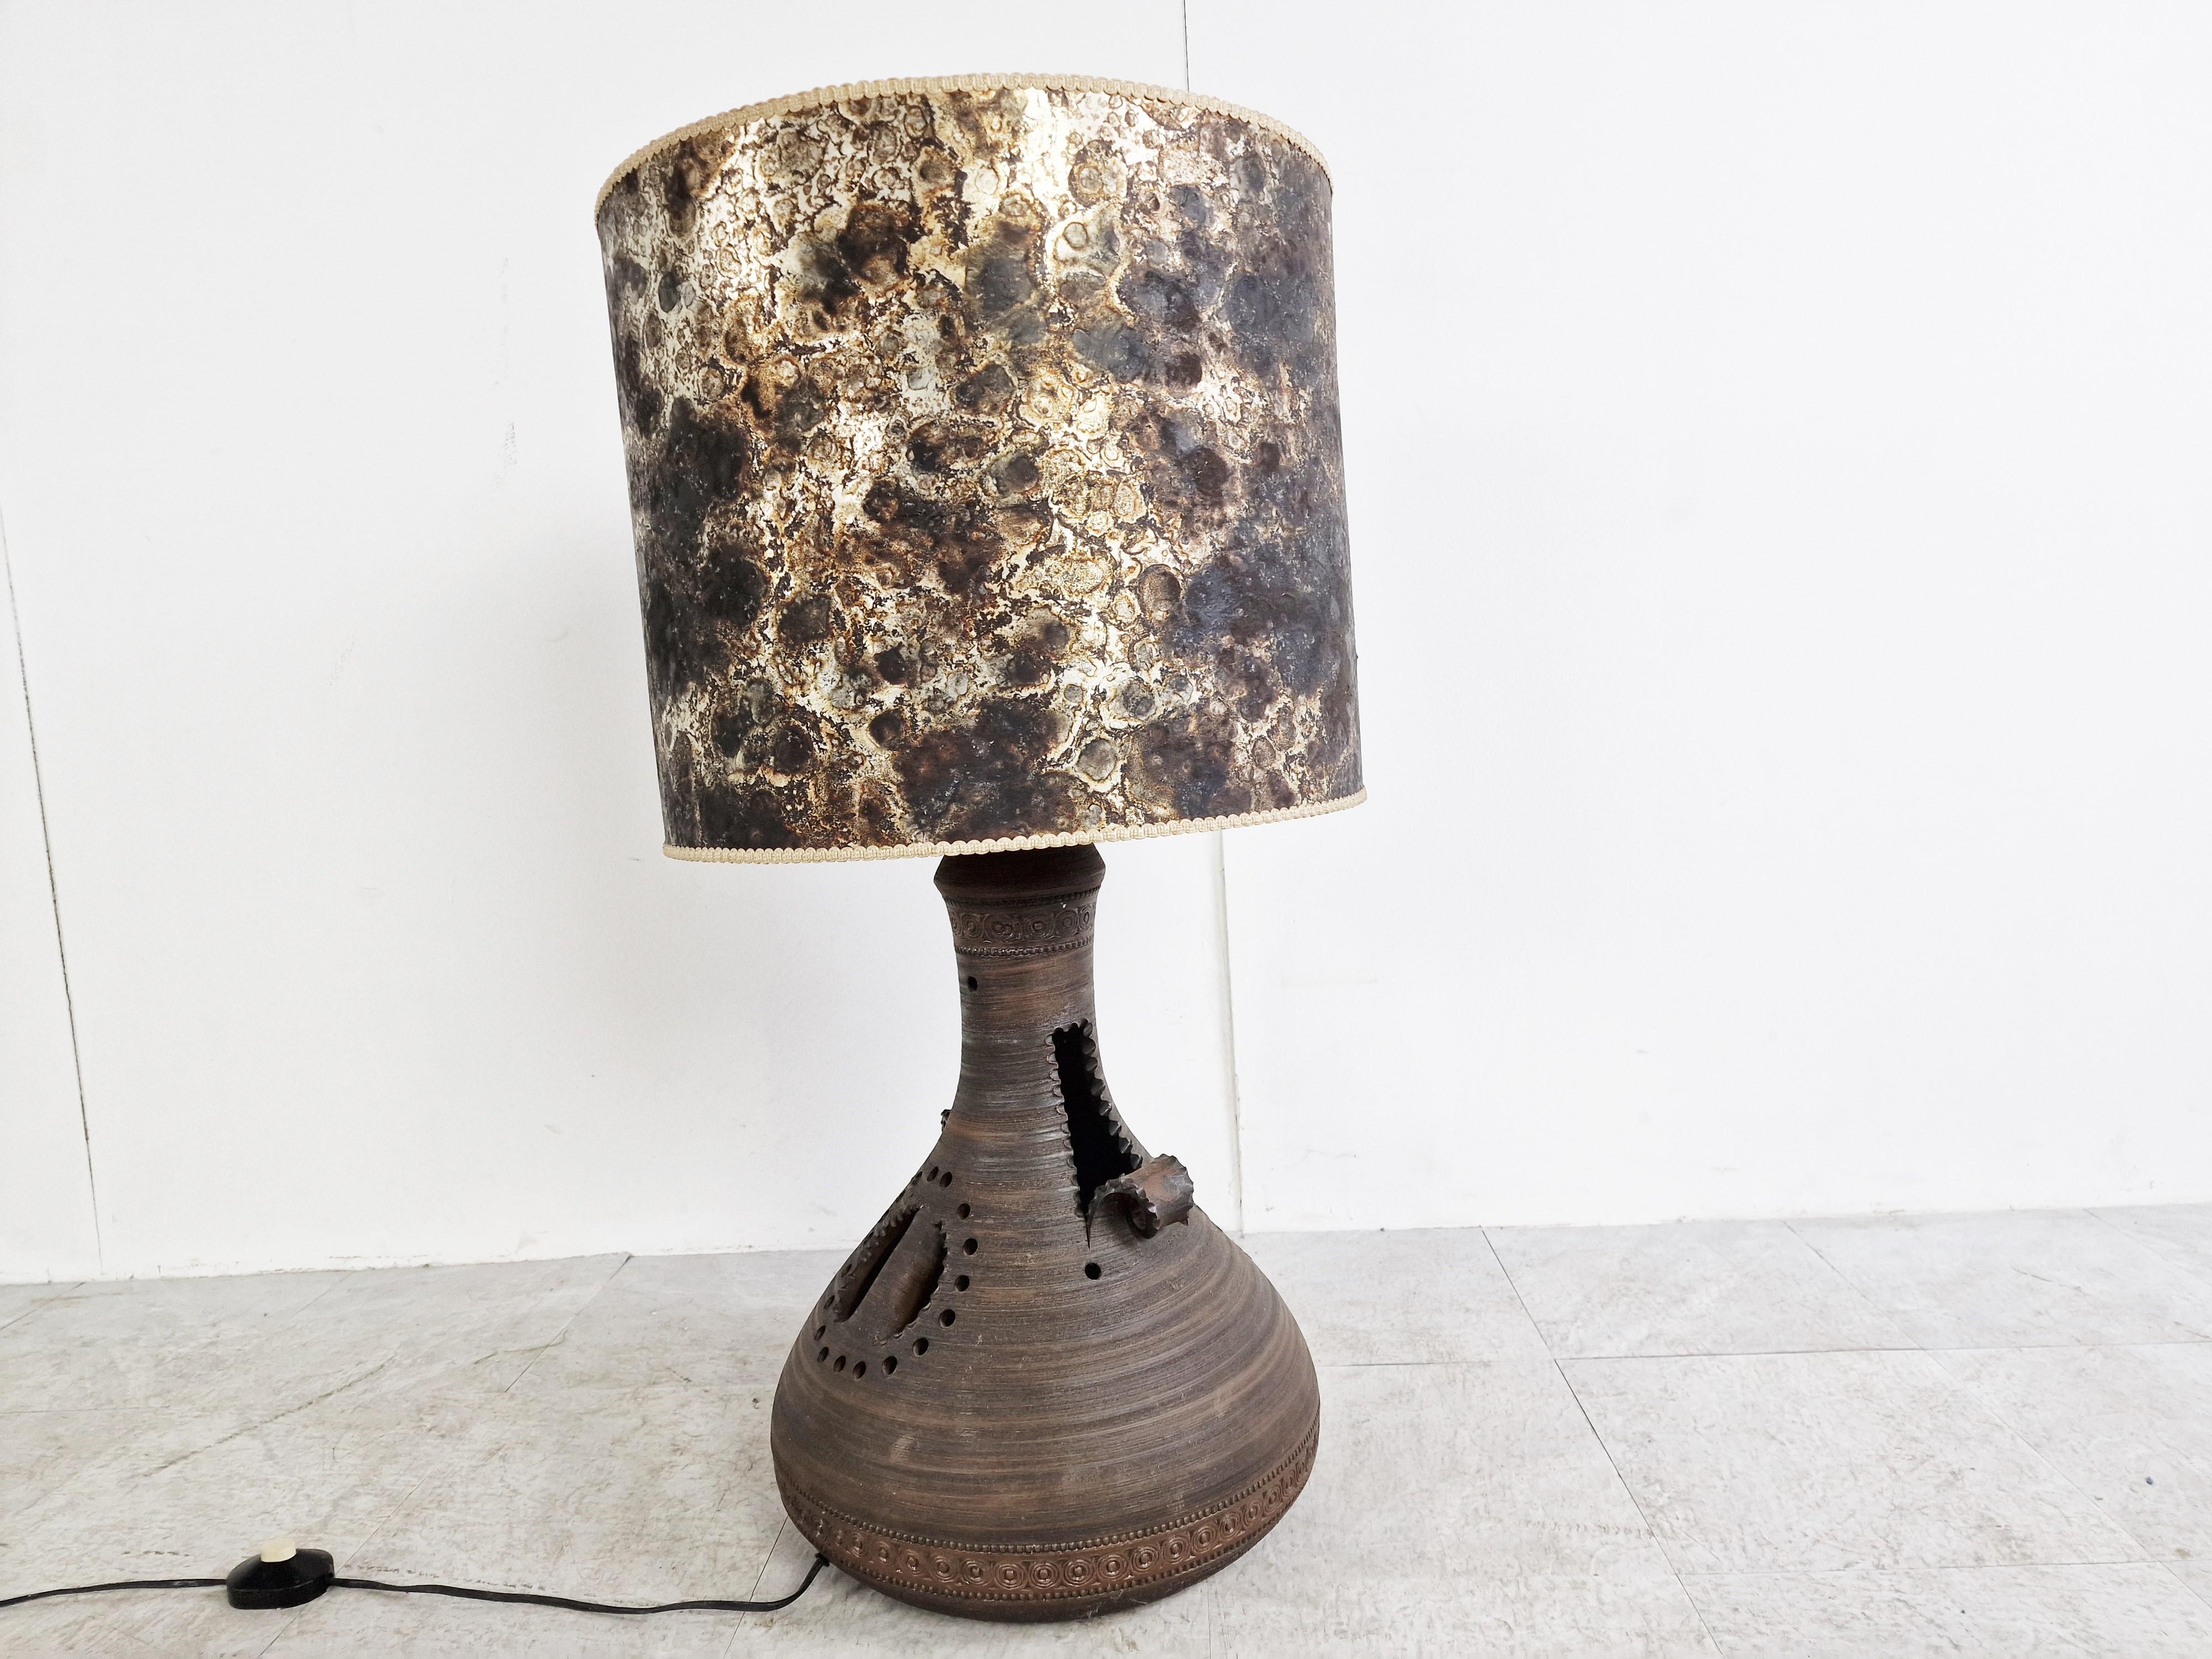 Striking sculptural mid century ceramic table lamp.

Beautiful vintage lamp shade.

Tested and ready to use with a regular E27 light bulb holder.

1960s - Belgium

Dimensions:
Height 91cm/35.82